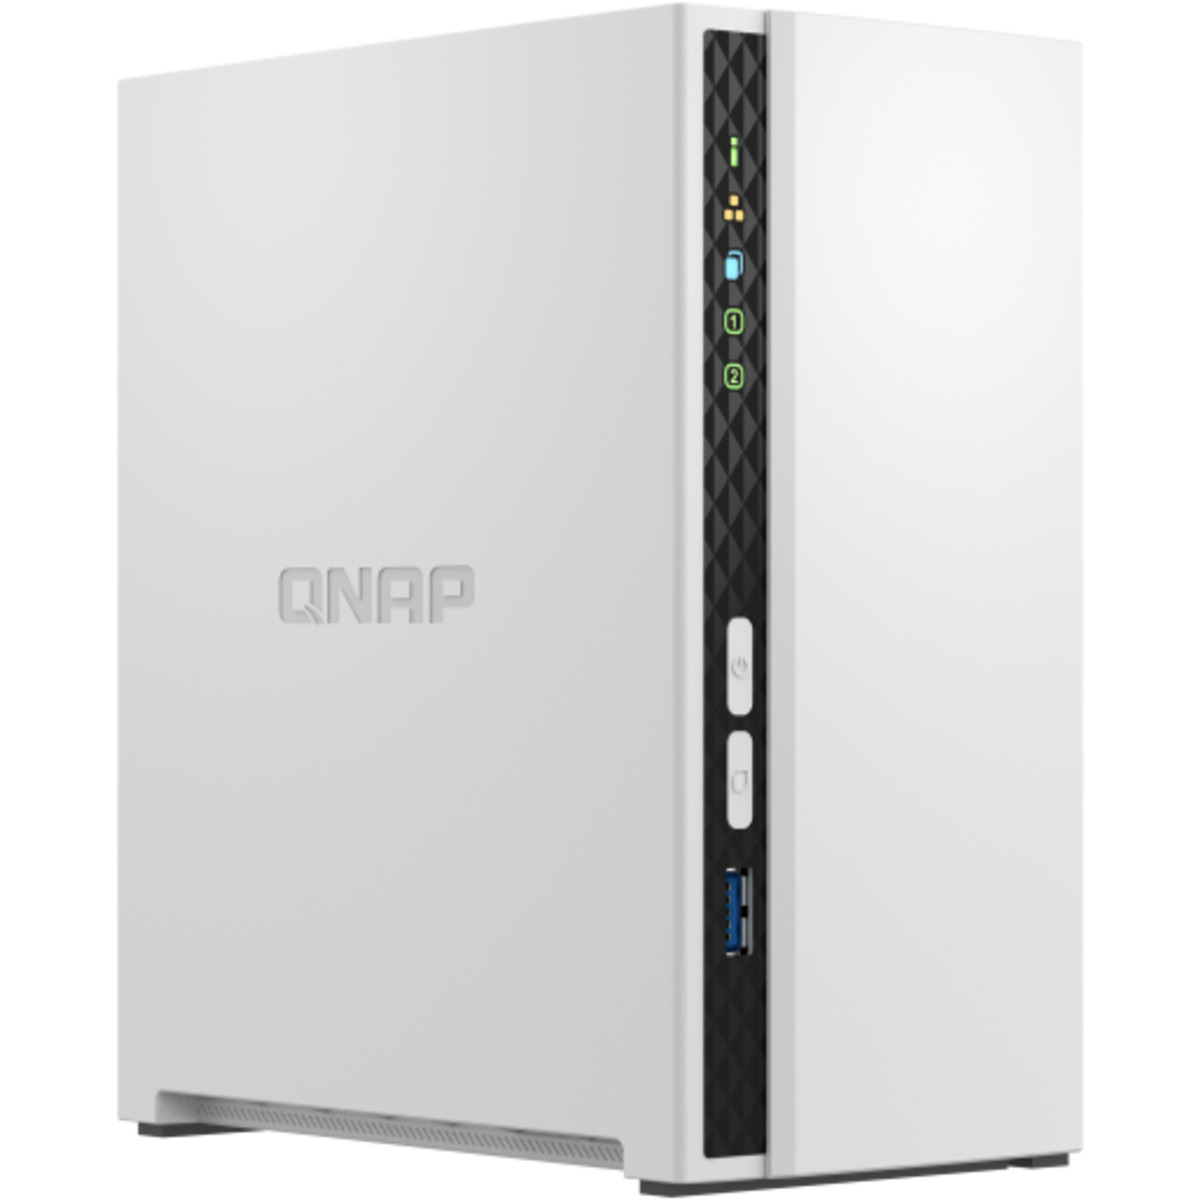 buy $789 QNAP TS-233 8tb Desktop NAS - Network Attached Storage Device 2x4000gb Samsung 870 EVO MZ-77E4T0BAM 2.5 560/530MB/s SATA 6Gb/s SSD CONSUMER Class Drives Installed - Burn-In Tested - nas headquarters buy network attached storage server device das new raid-5 free shipping simply usa TS-233